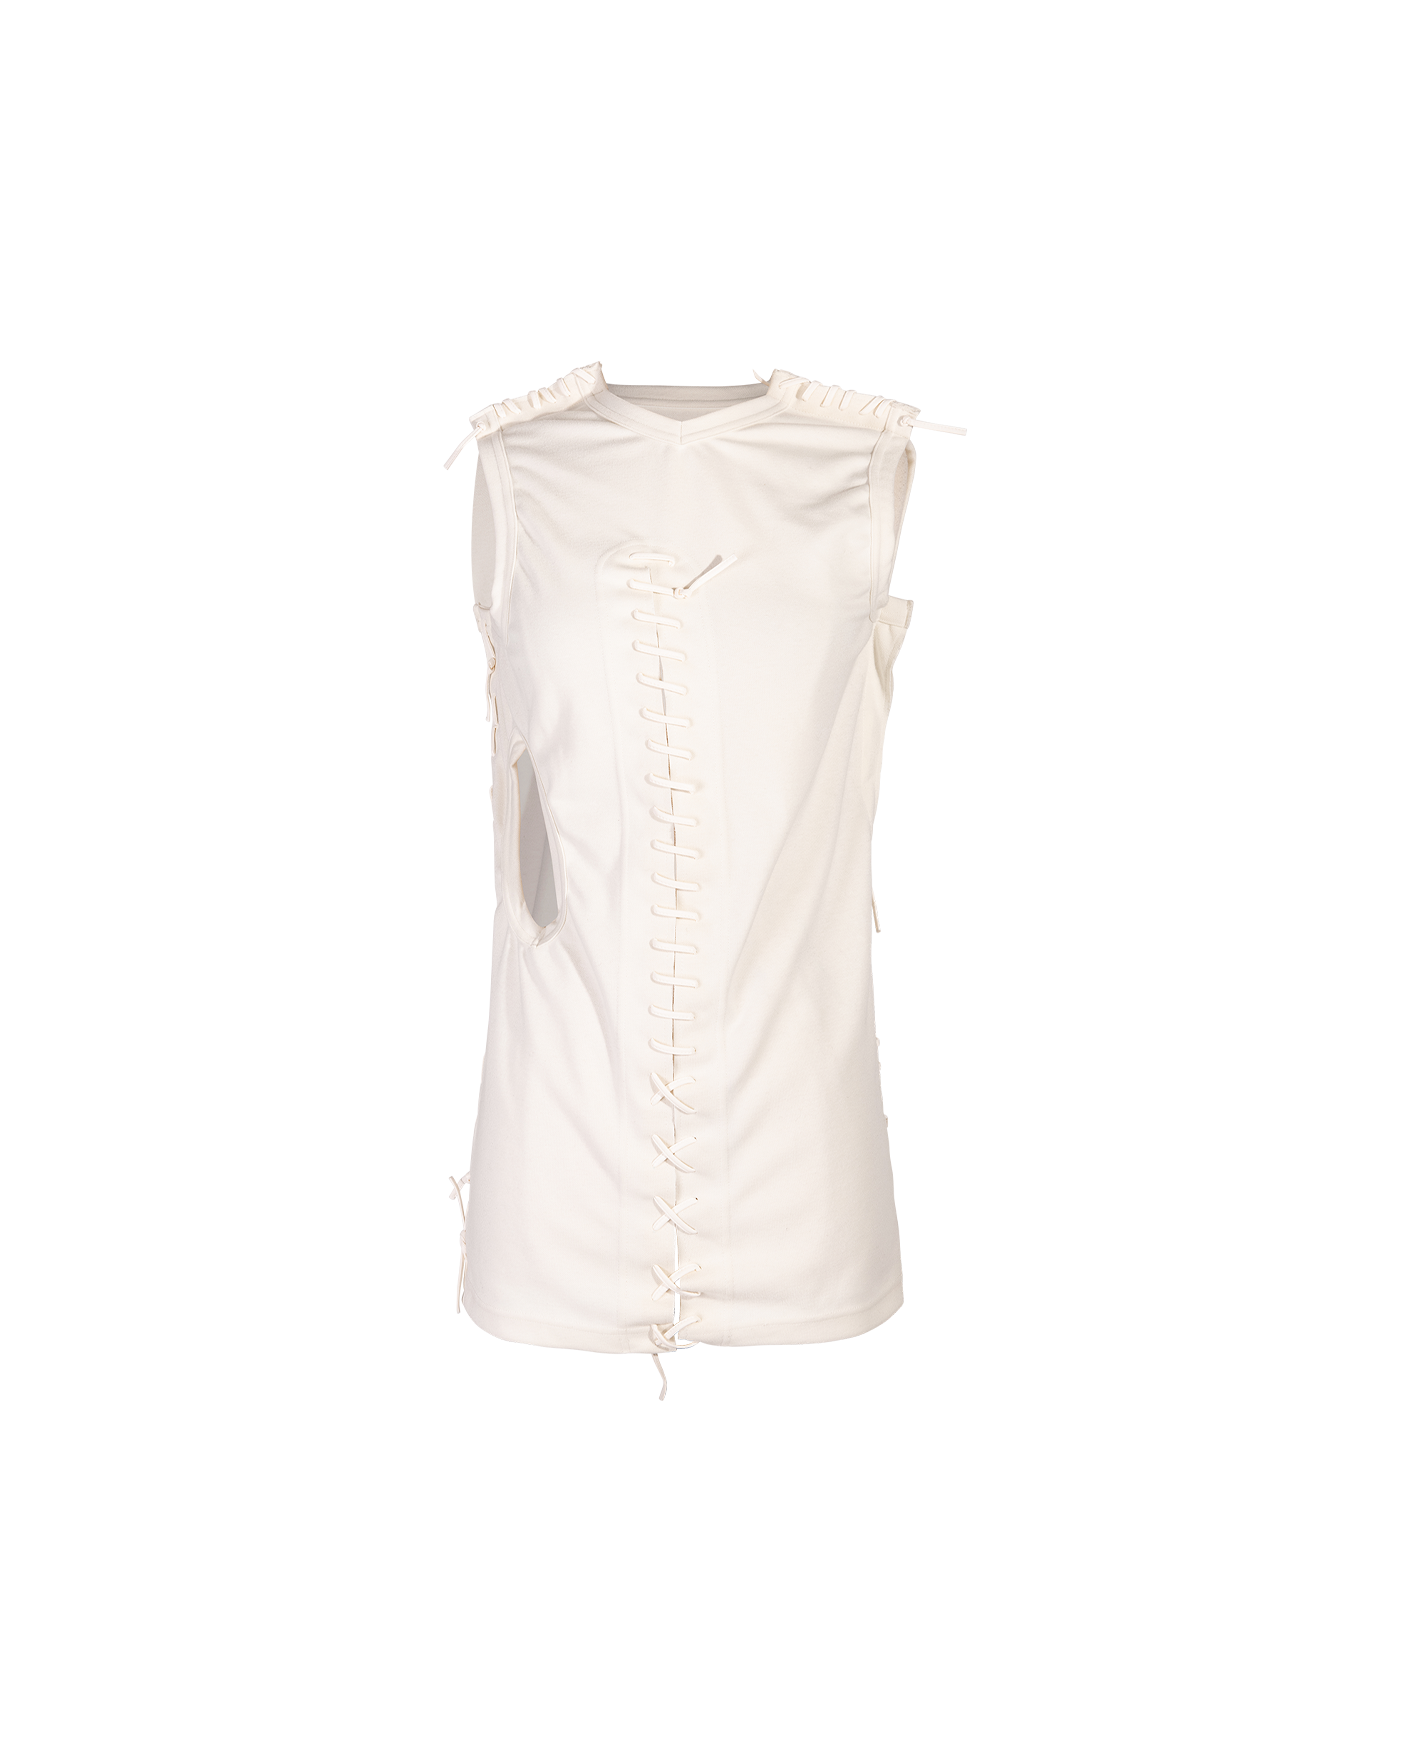 S/S 2005 White Tank Top with Saddle Stitch Details